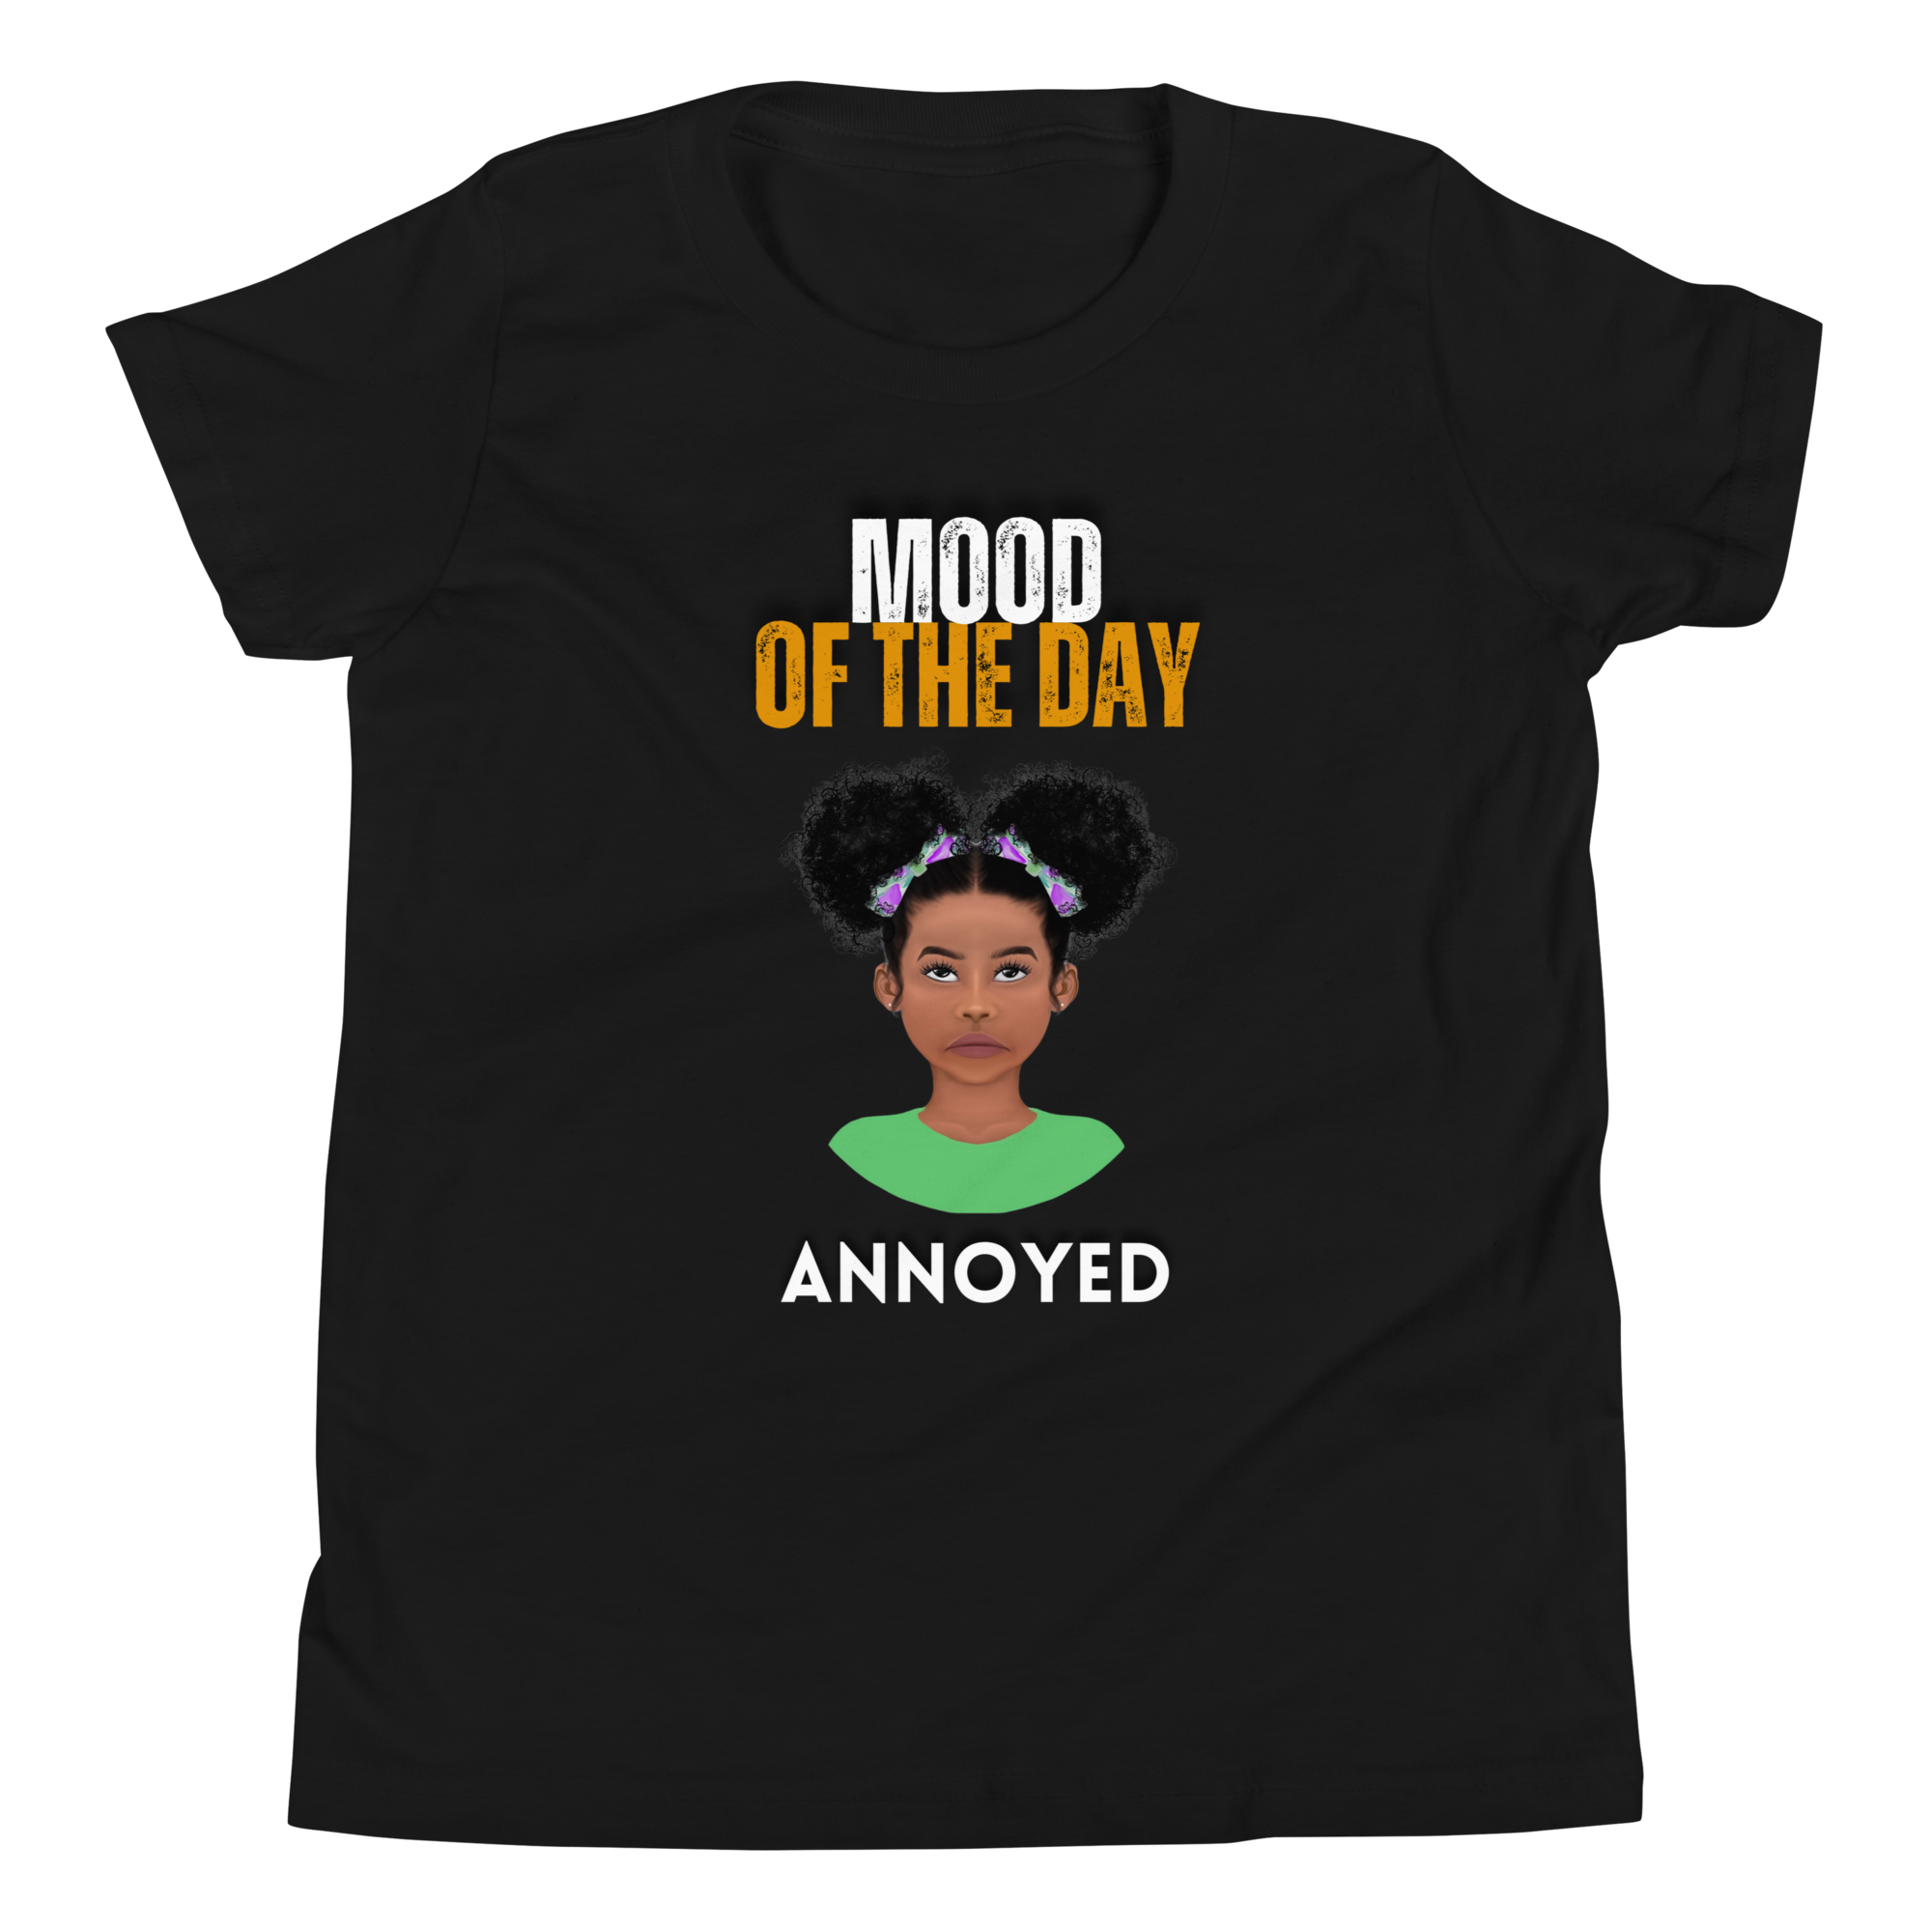 Youth Mood of the Day T-shirt - Annoyed